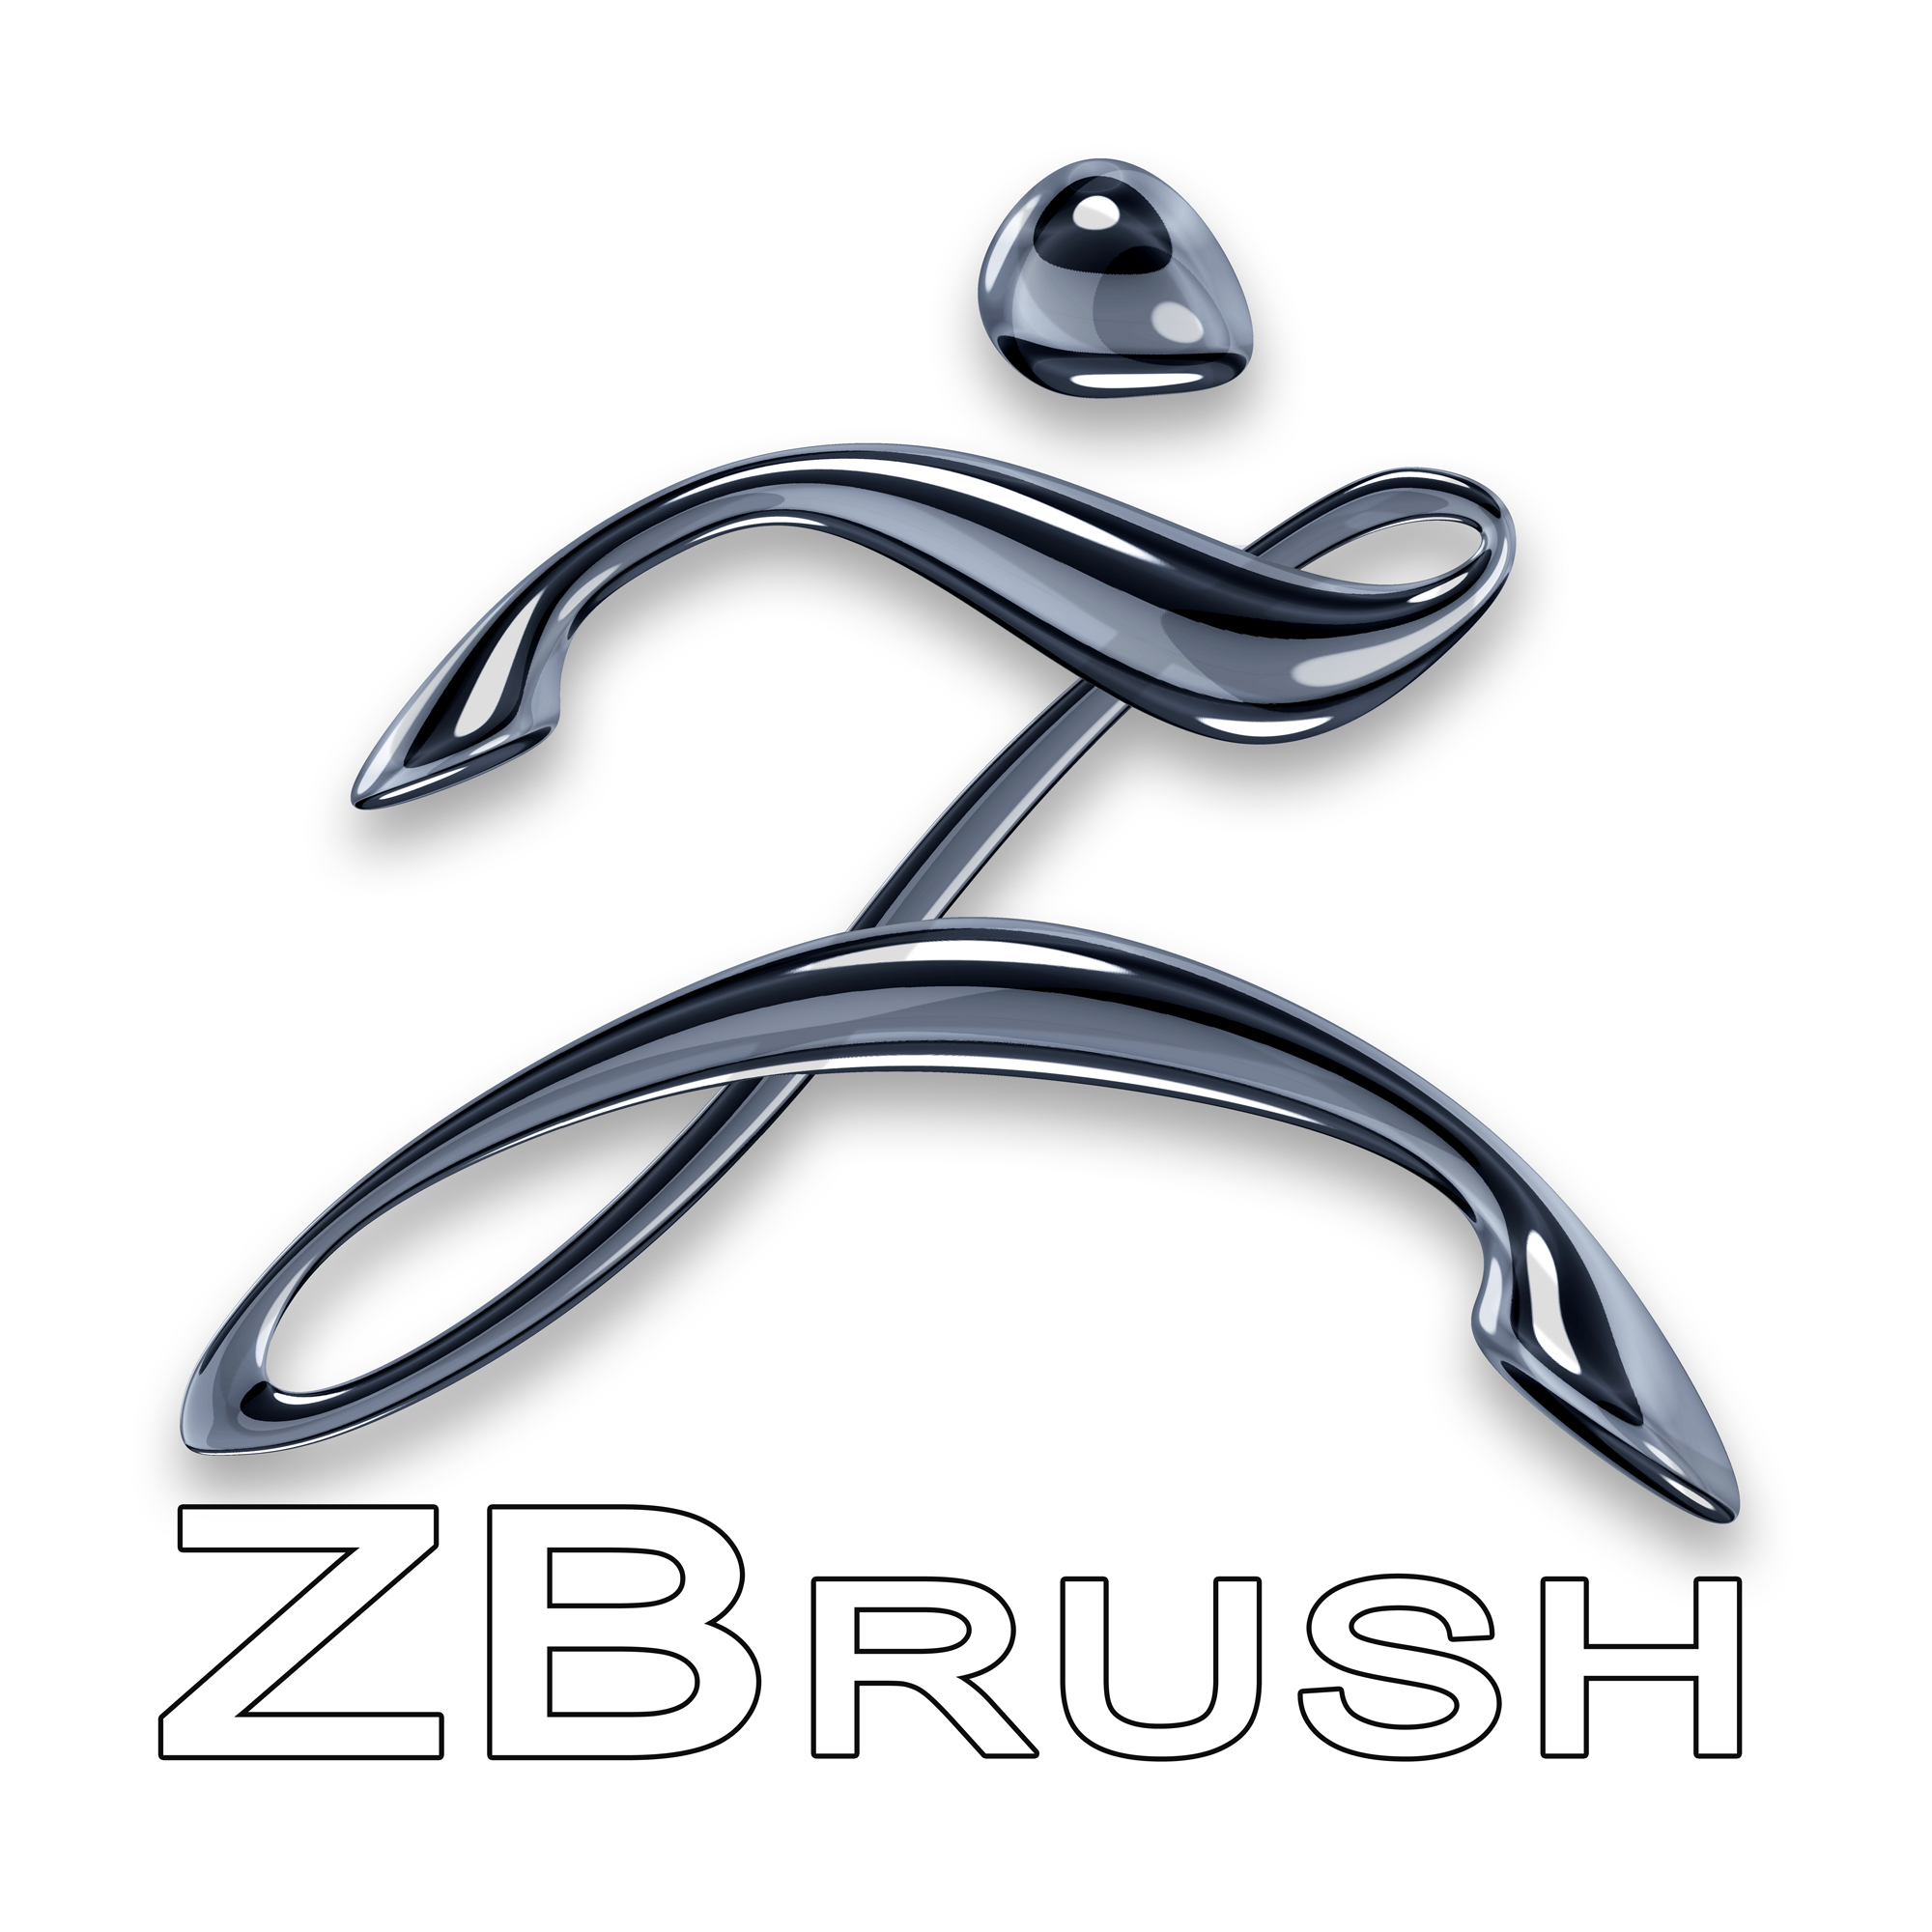 what is the best computer for 3d modeling zbrush